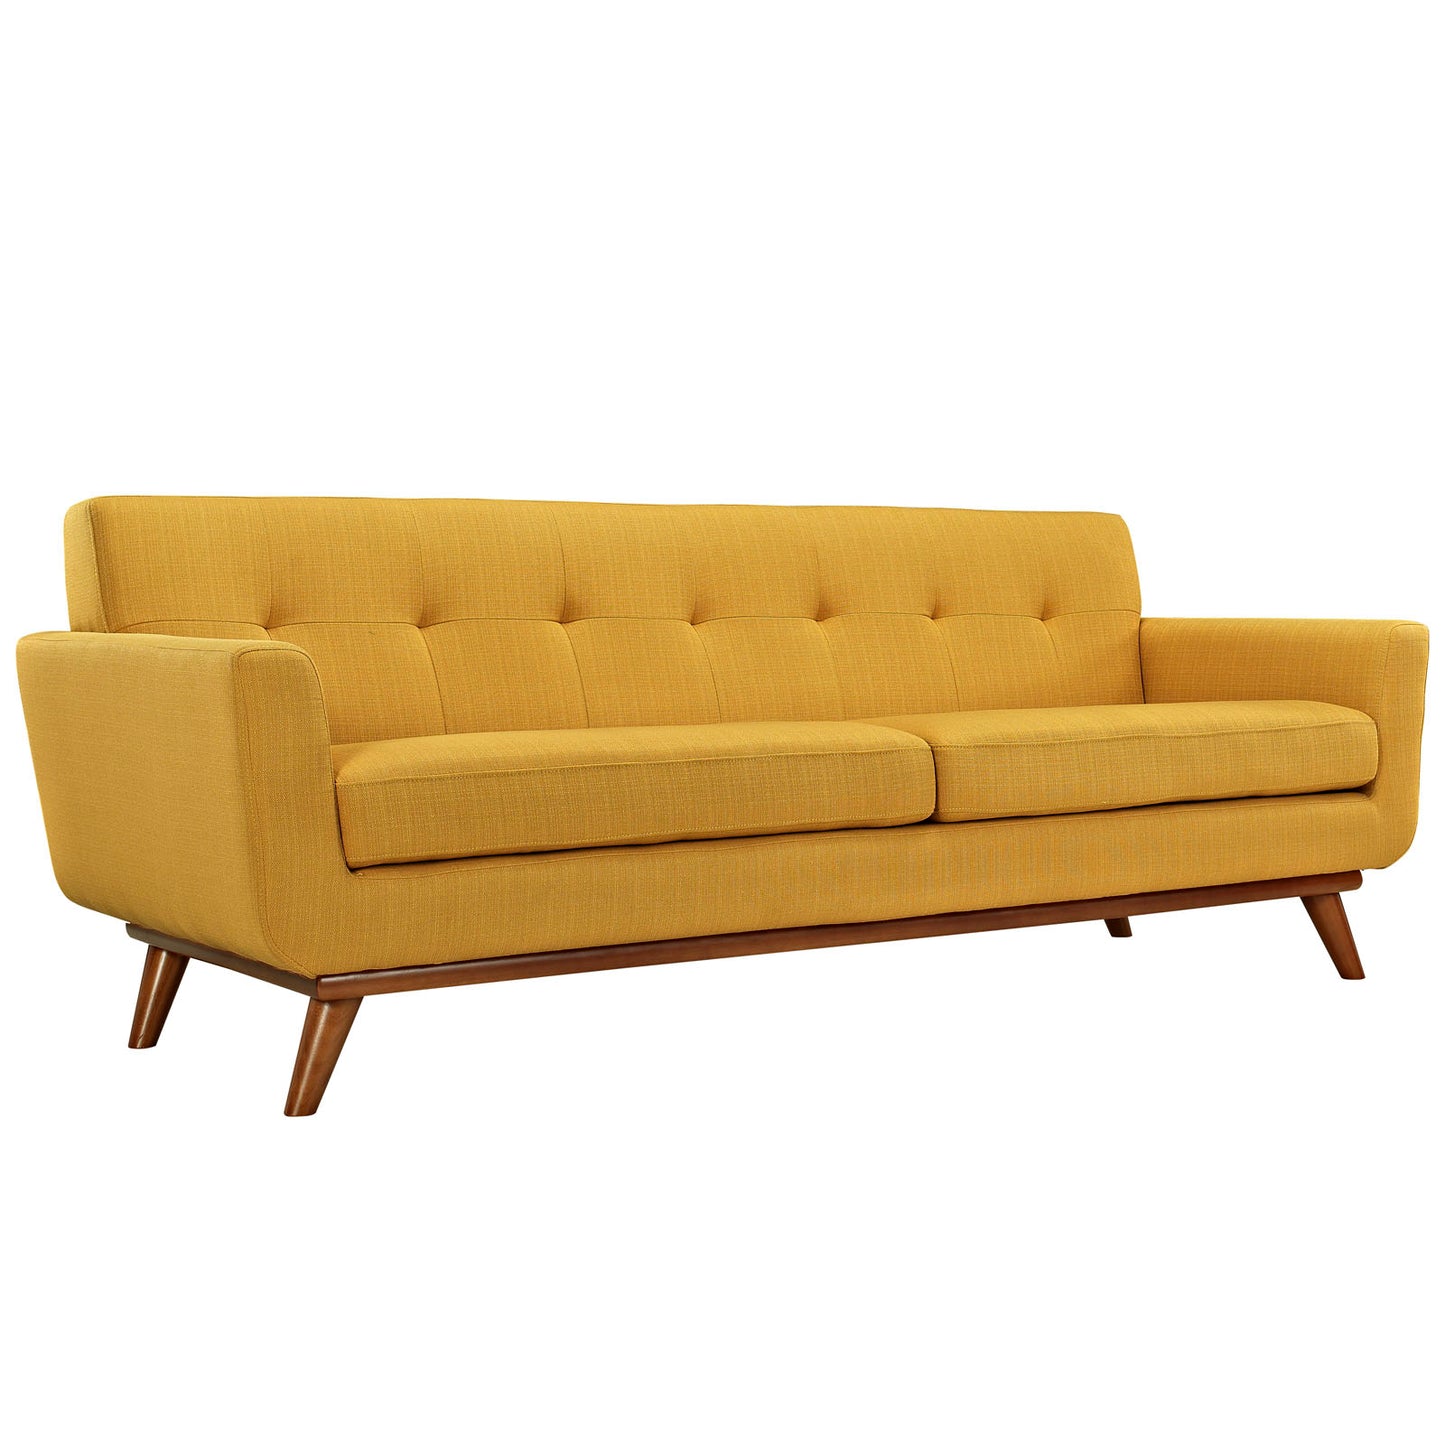 Engage Sofa Loveseat and Armchair Set of 3 Citrus EEI-1349-CIT